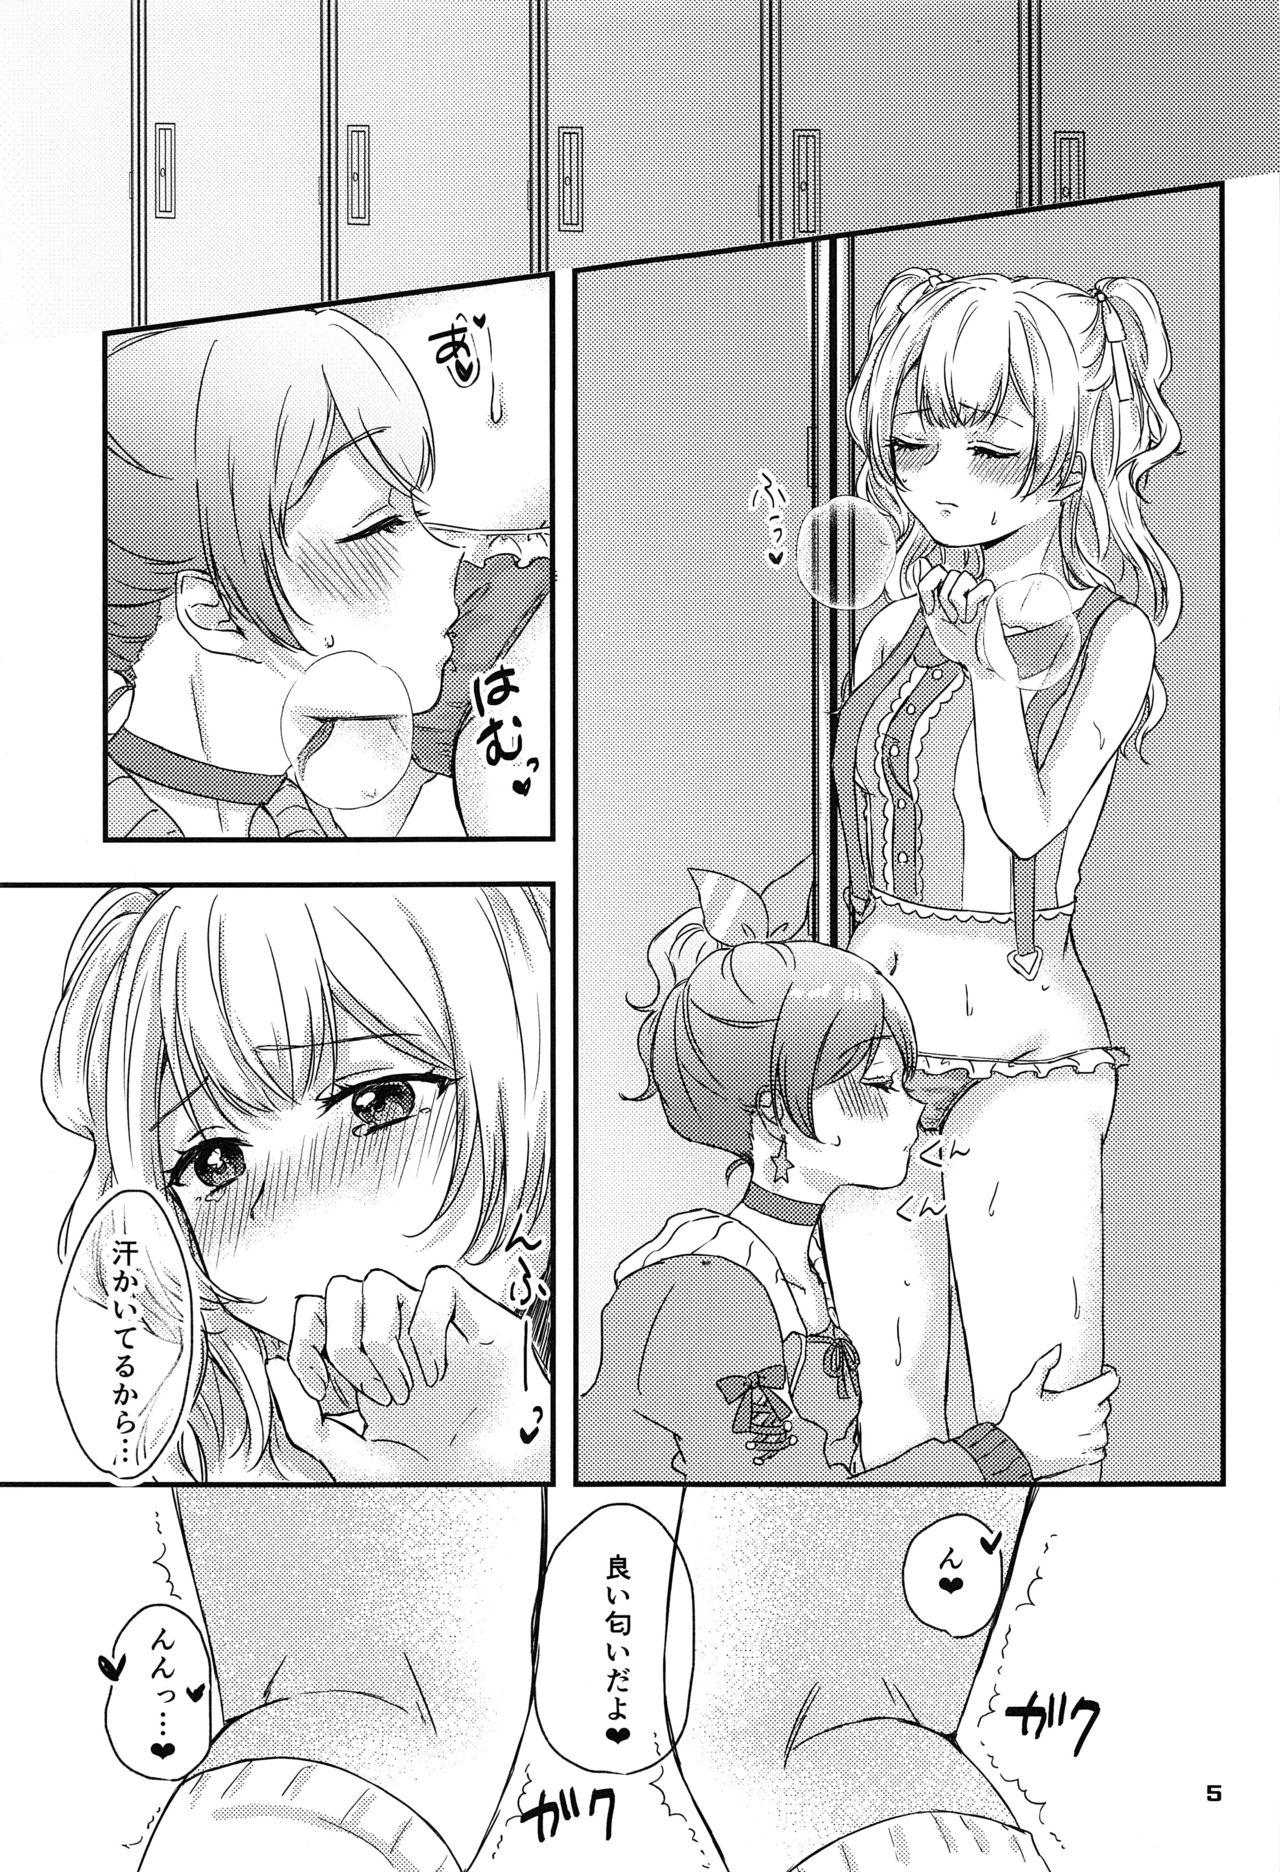 Culona Sweet Costume Sex time. - Bang dream Student - Page 3